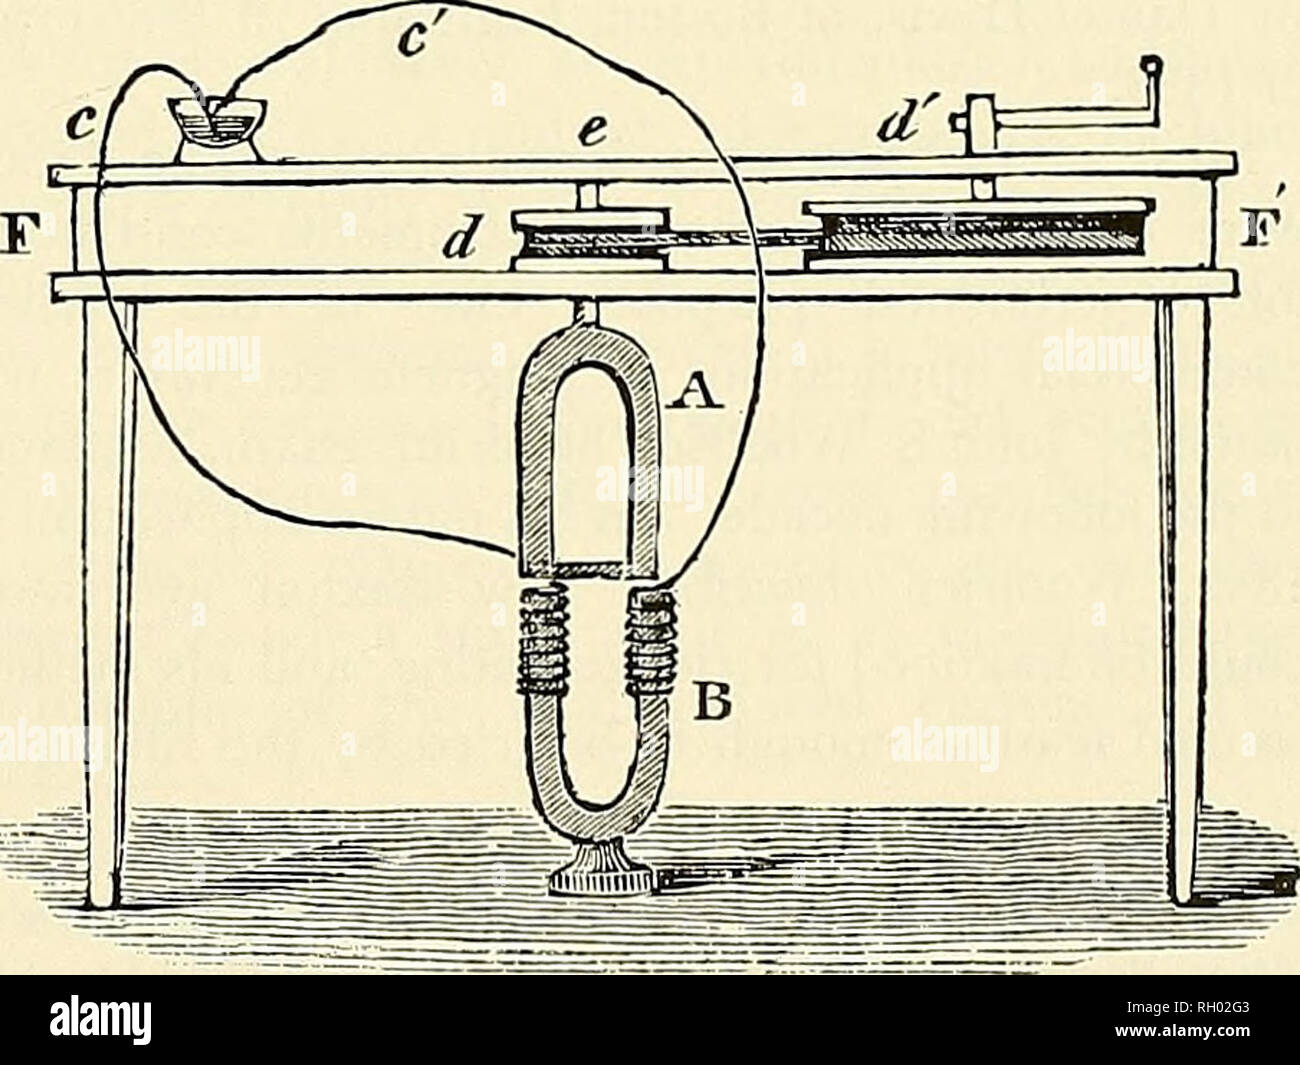 . Bulletin. Science. Figure 20.—Some of the various means used by Faraday to induce an electric current by magnetism: (a) coil to induce a momentary current in another coil by making or breaking the galvanic circuit in the first coil, (A, c) inducing a momentary current by making or breaking a magnetic circuit, (d) inducing a momentary current by moving a magnet through a coil of wire, and (e) inducing a continuous current by rotating a conducting disk in a magnetic field. The last was the converse of the Barlow wheel experiment. From Philosophical Transactions, 1832, vol. 122, pi. 3. using th Stock Photo